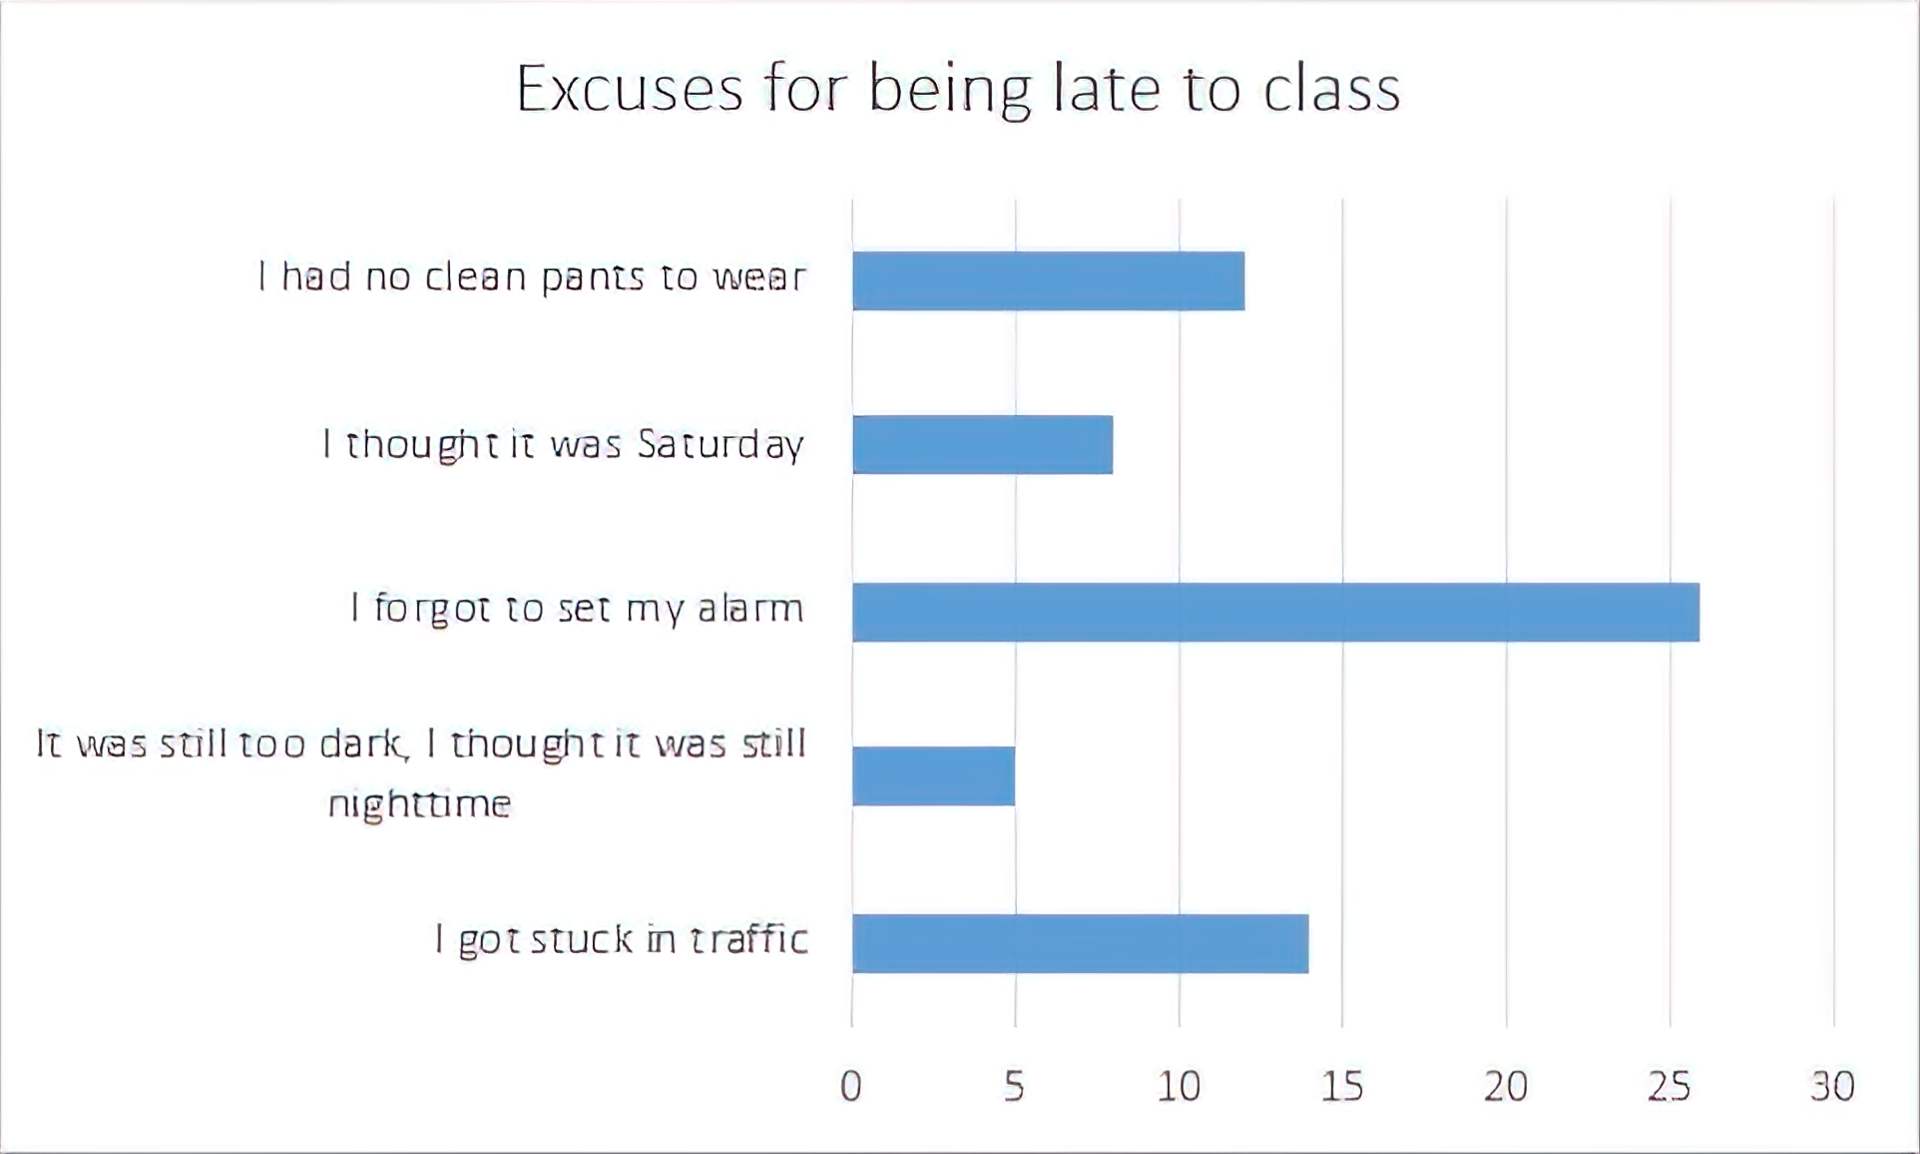 In this article, we are going to go over how to create a bar graph in Excel in just 3 simple steps, so you can utilize this function to the fullest.